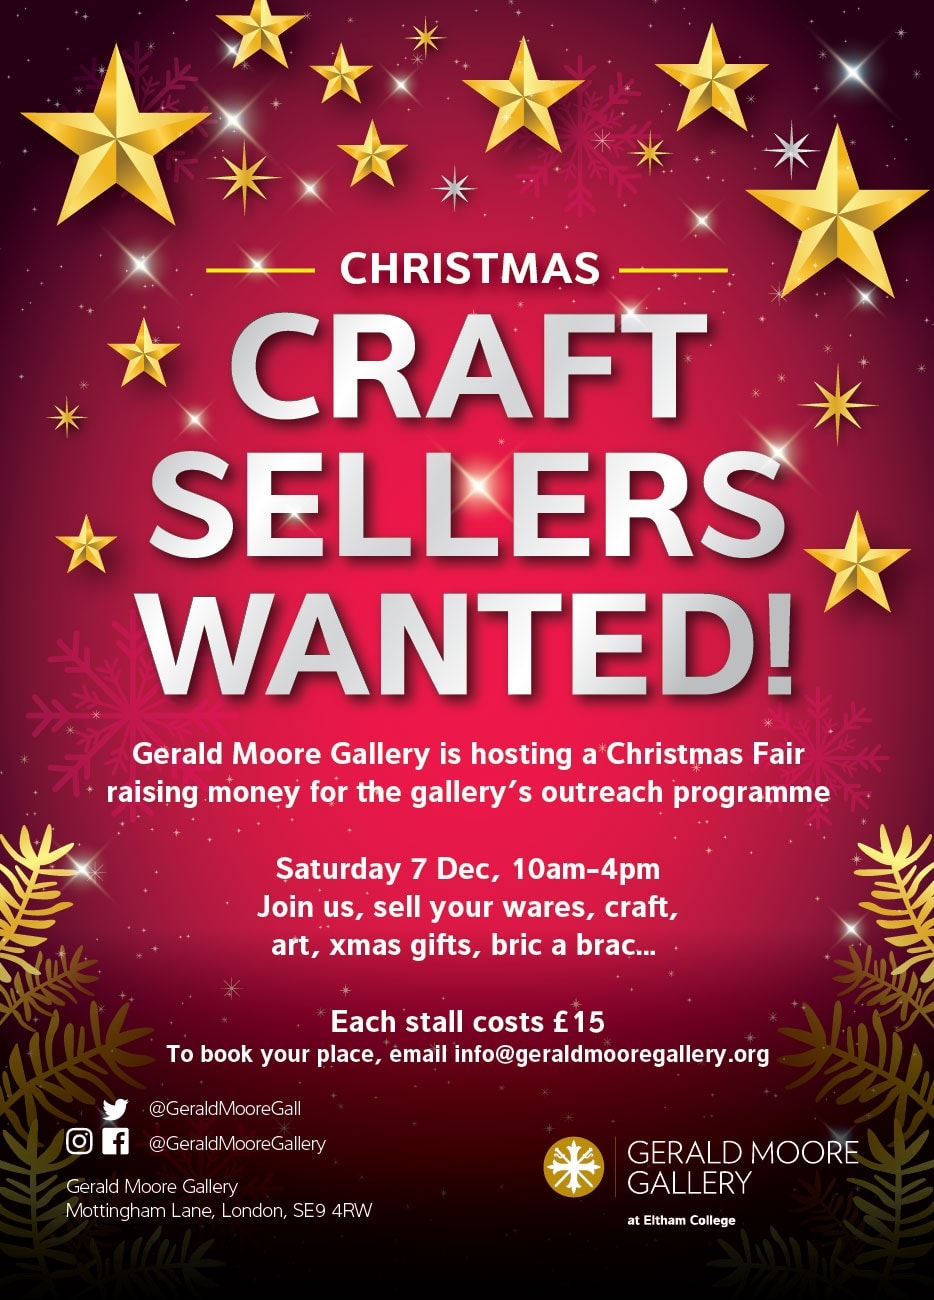 Craft Sellers Wanted!